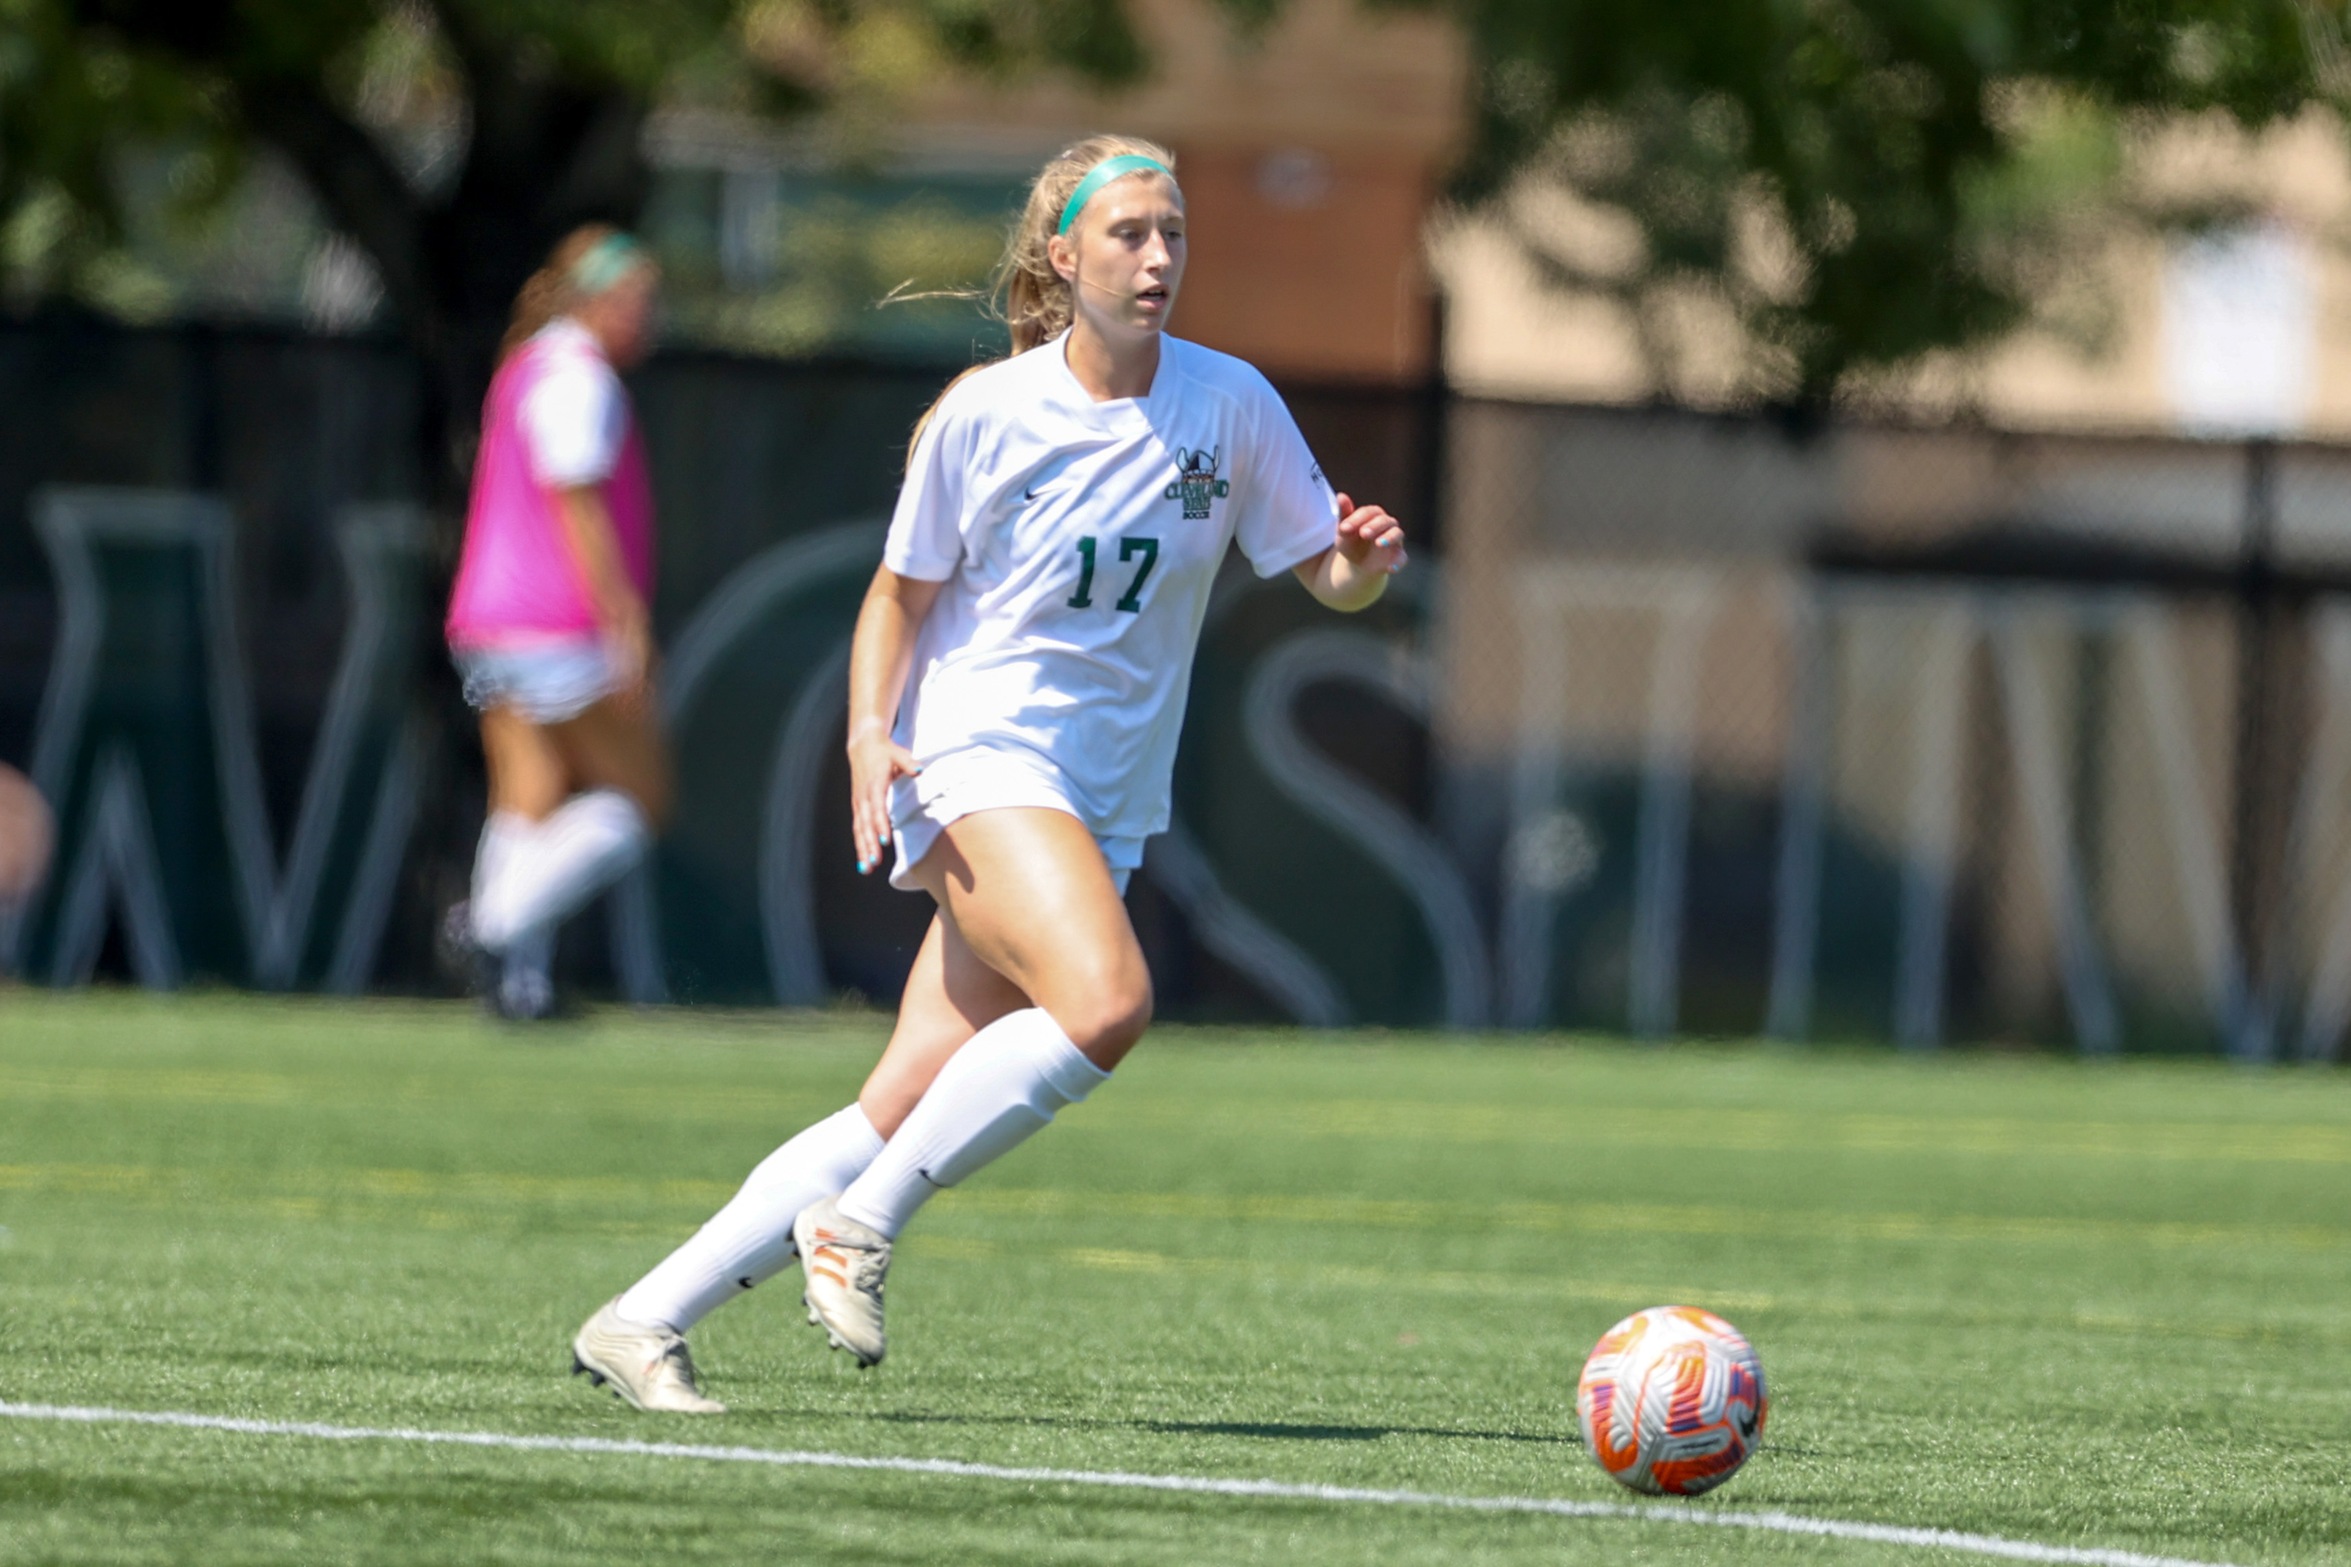 Ramicone Named Horizon League Offensive Player of the Week